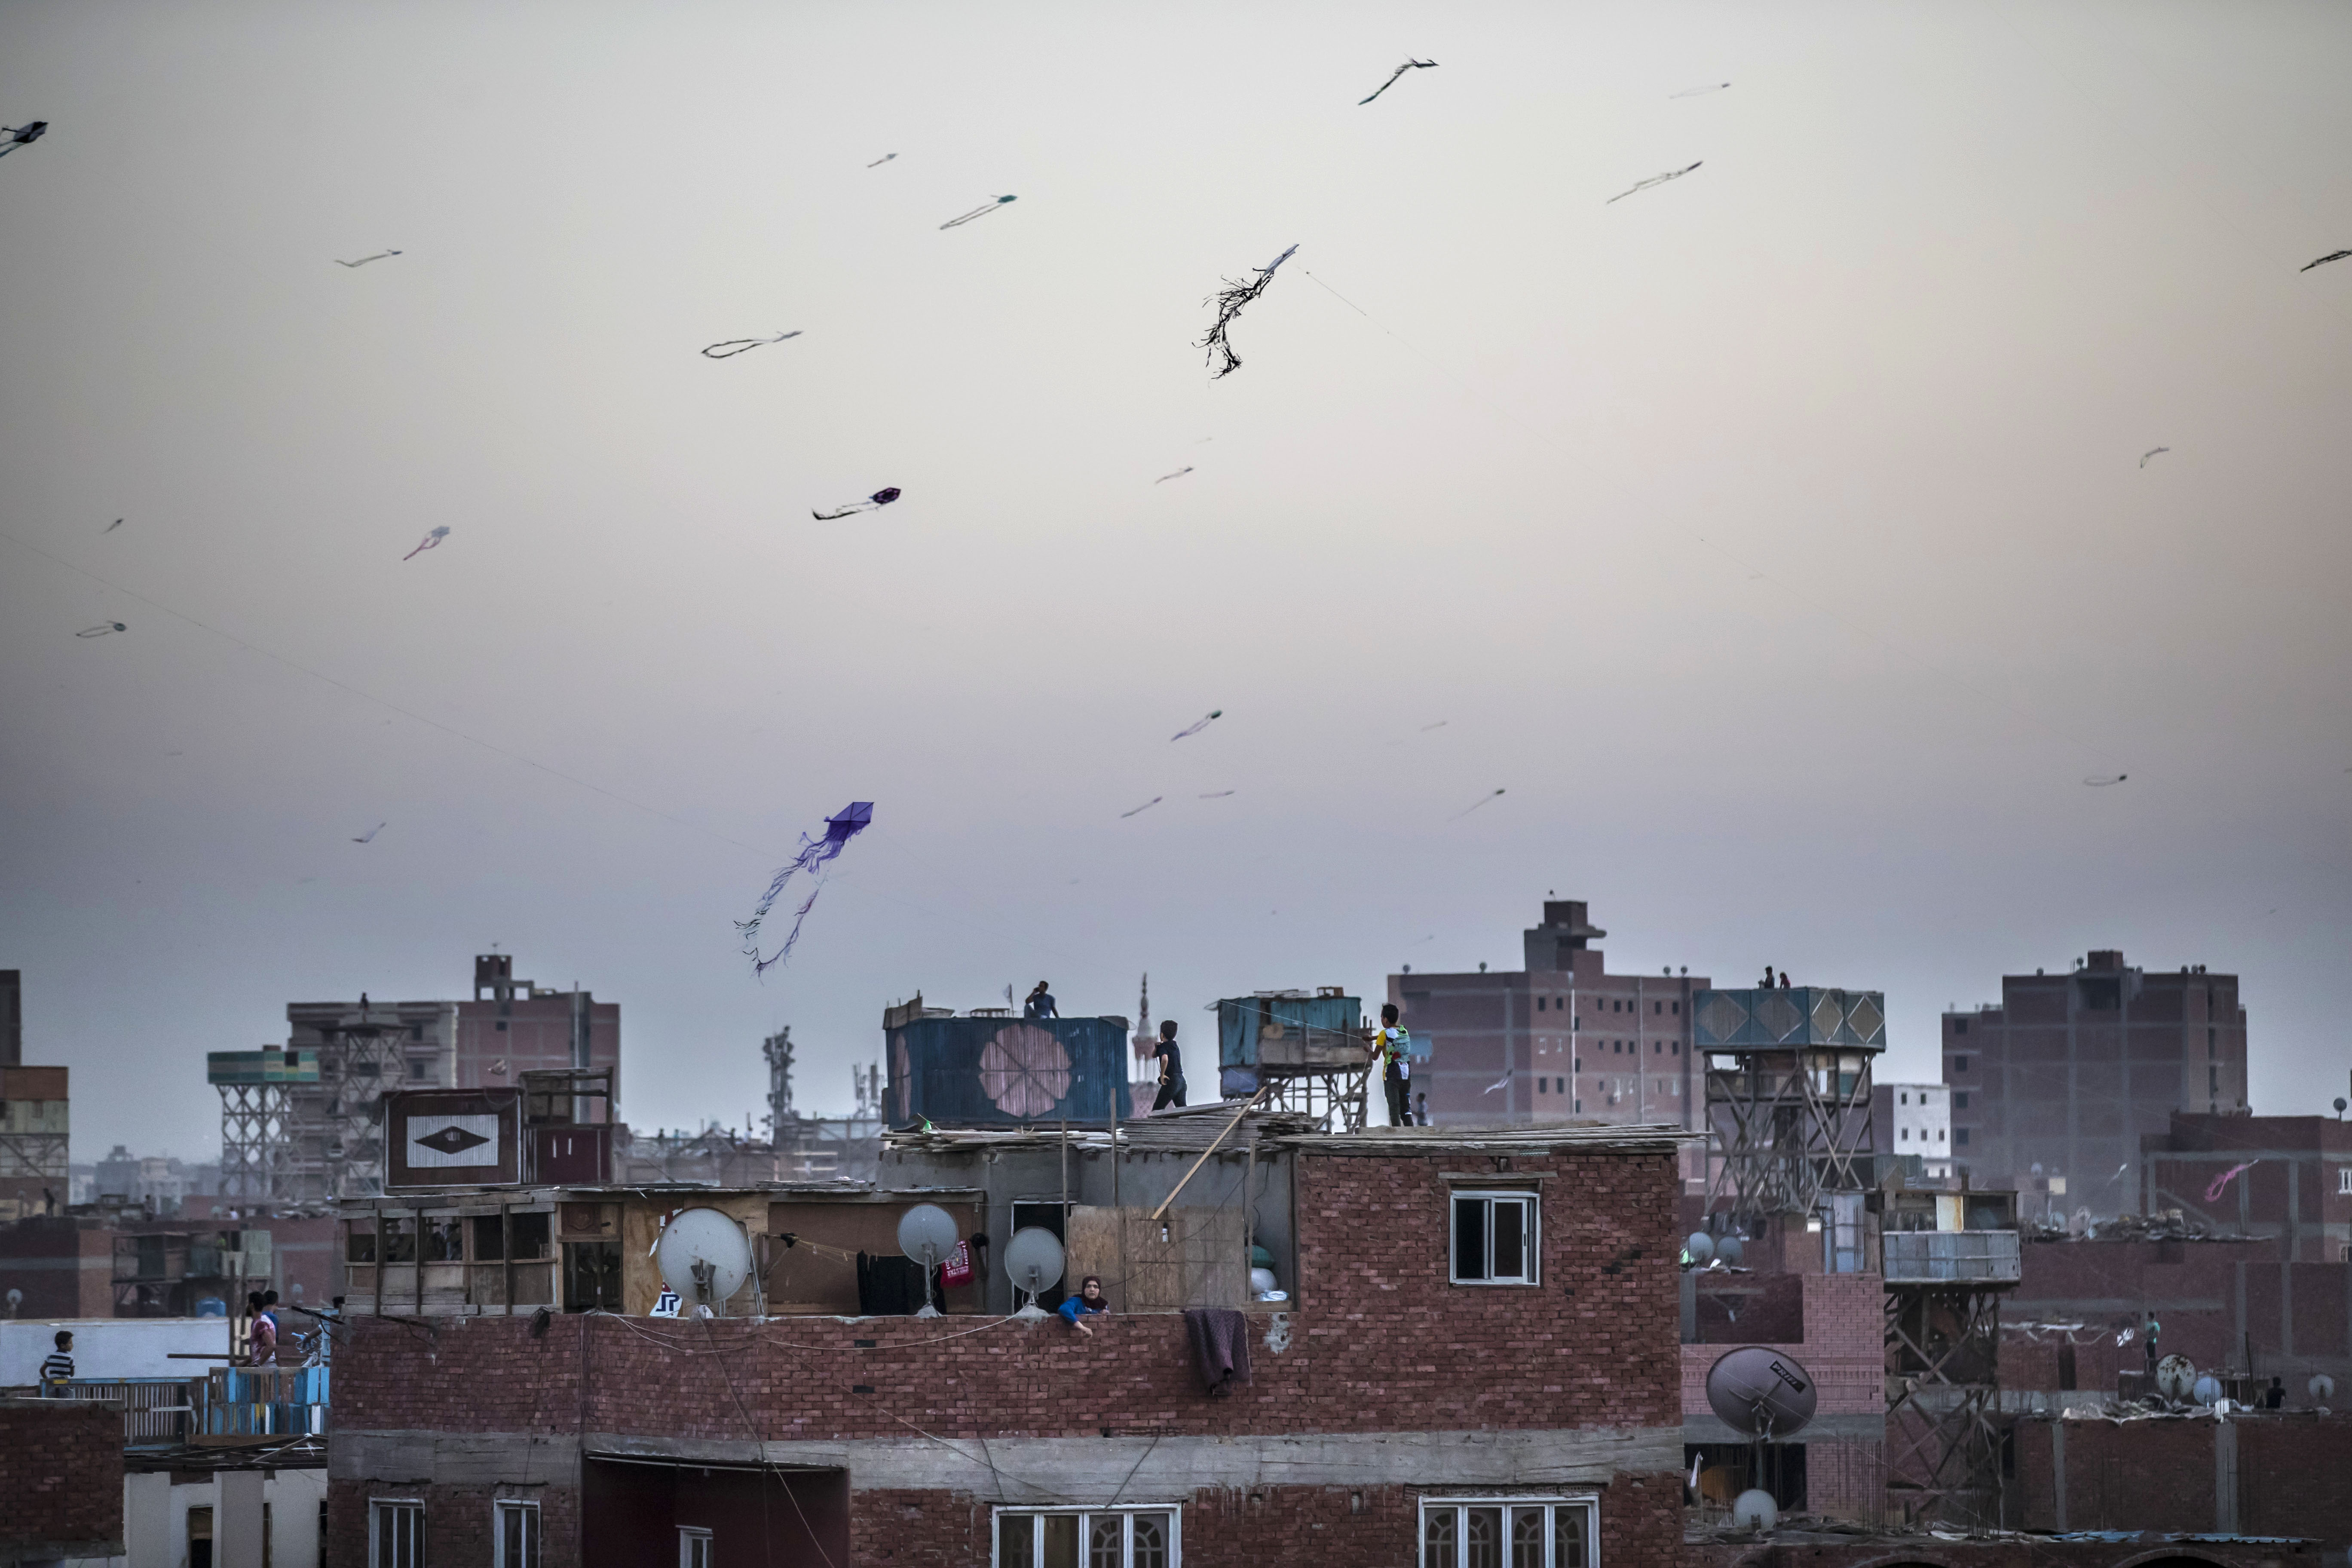 Egyptian youths fly kites in the Saft el-Laban district of the Egyptian city of Giza, near the capital Cairo (AFP)